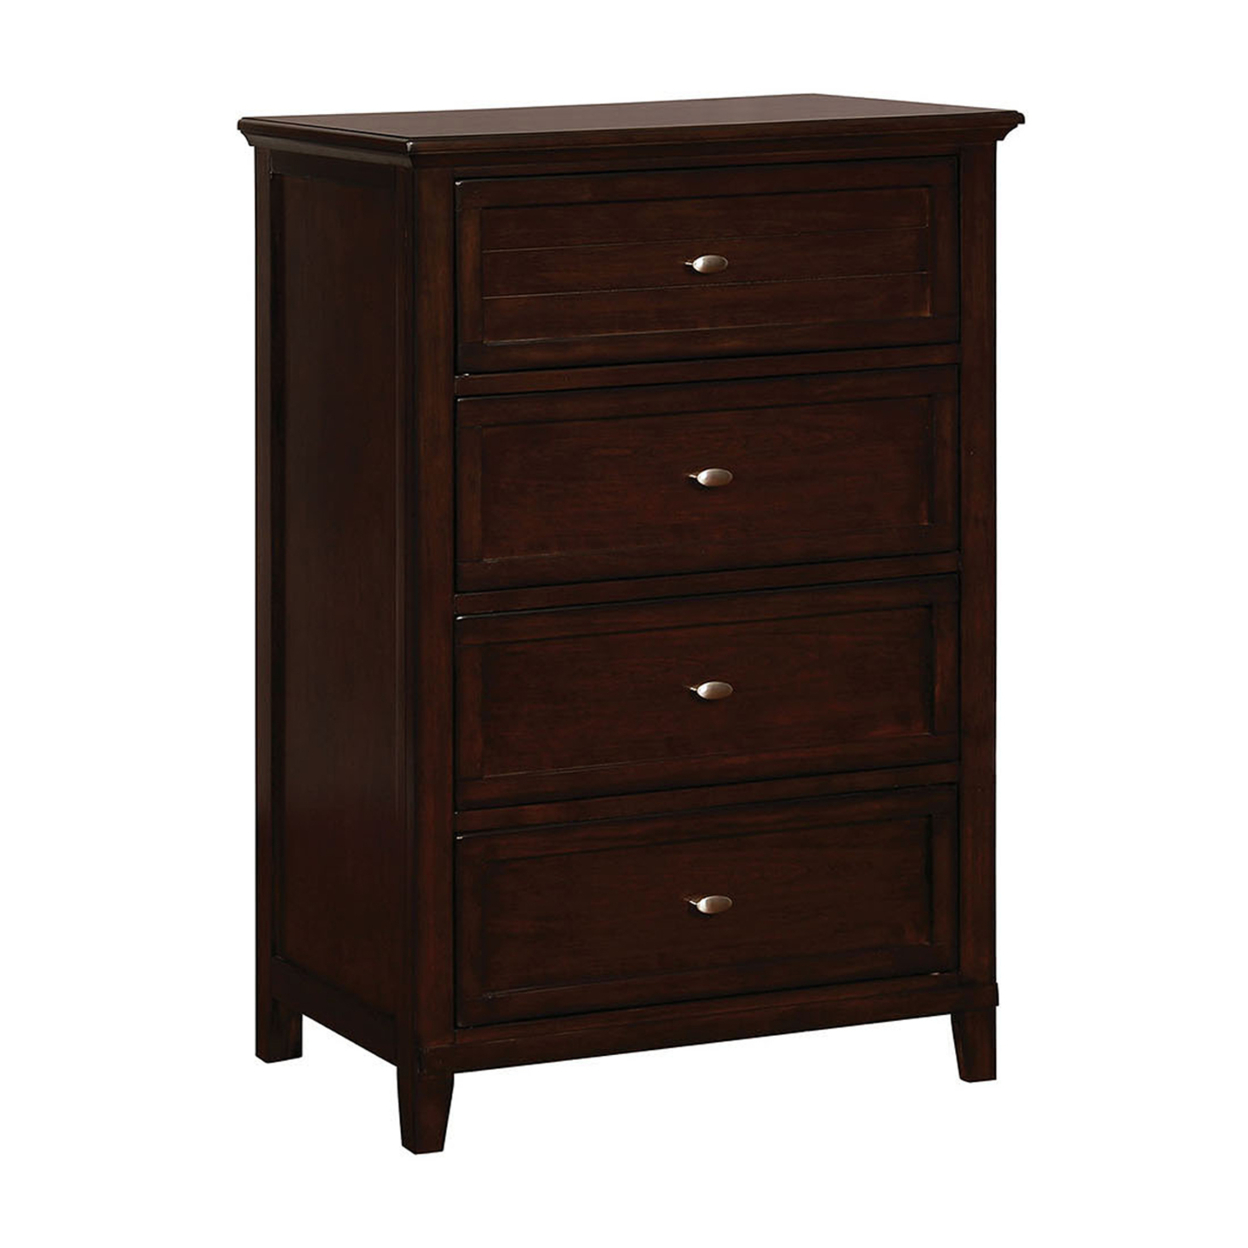 Wooden Chest With 4 Drawers And Chamfered Legs, Cherry Brown- Saltoro Sherpi